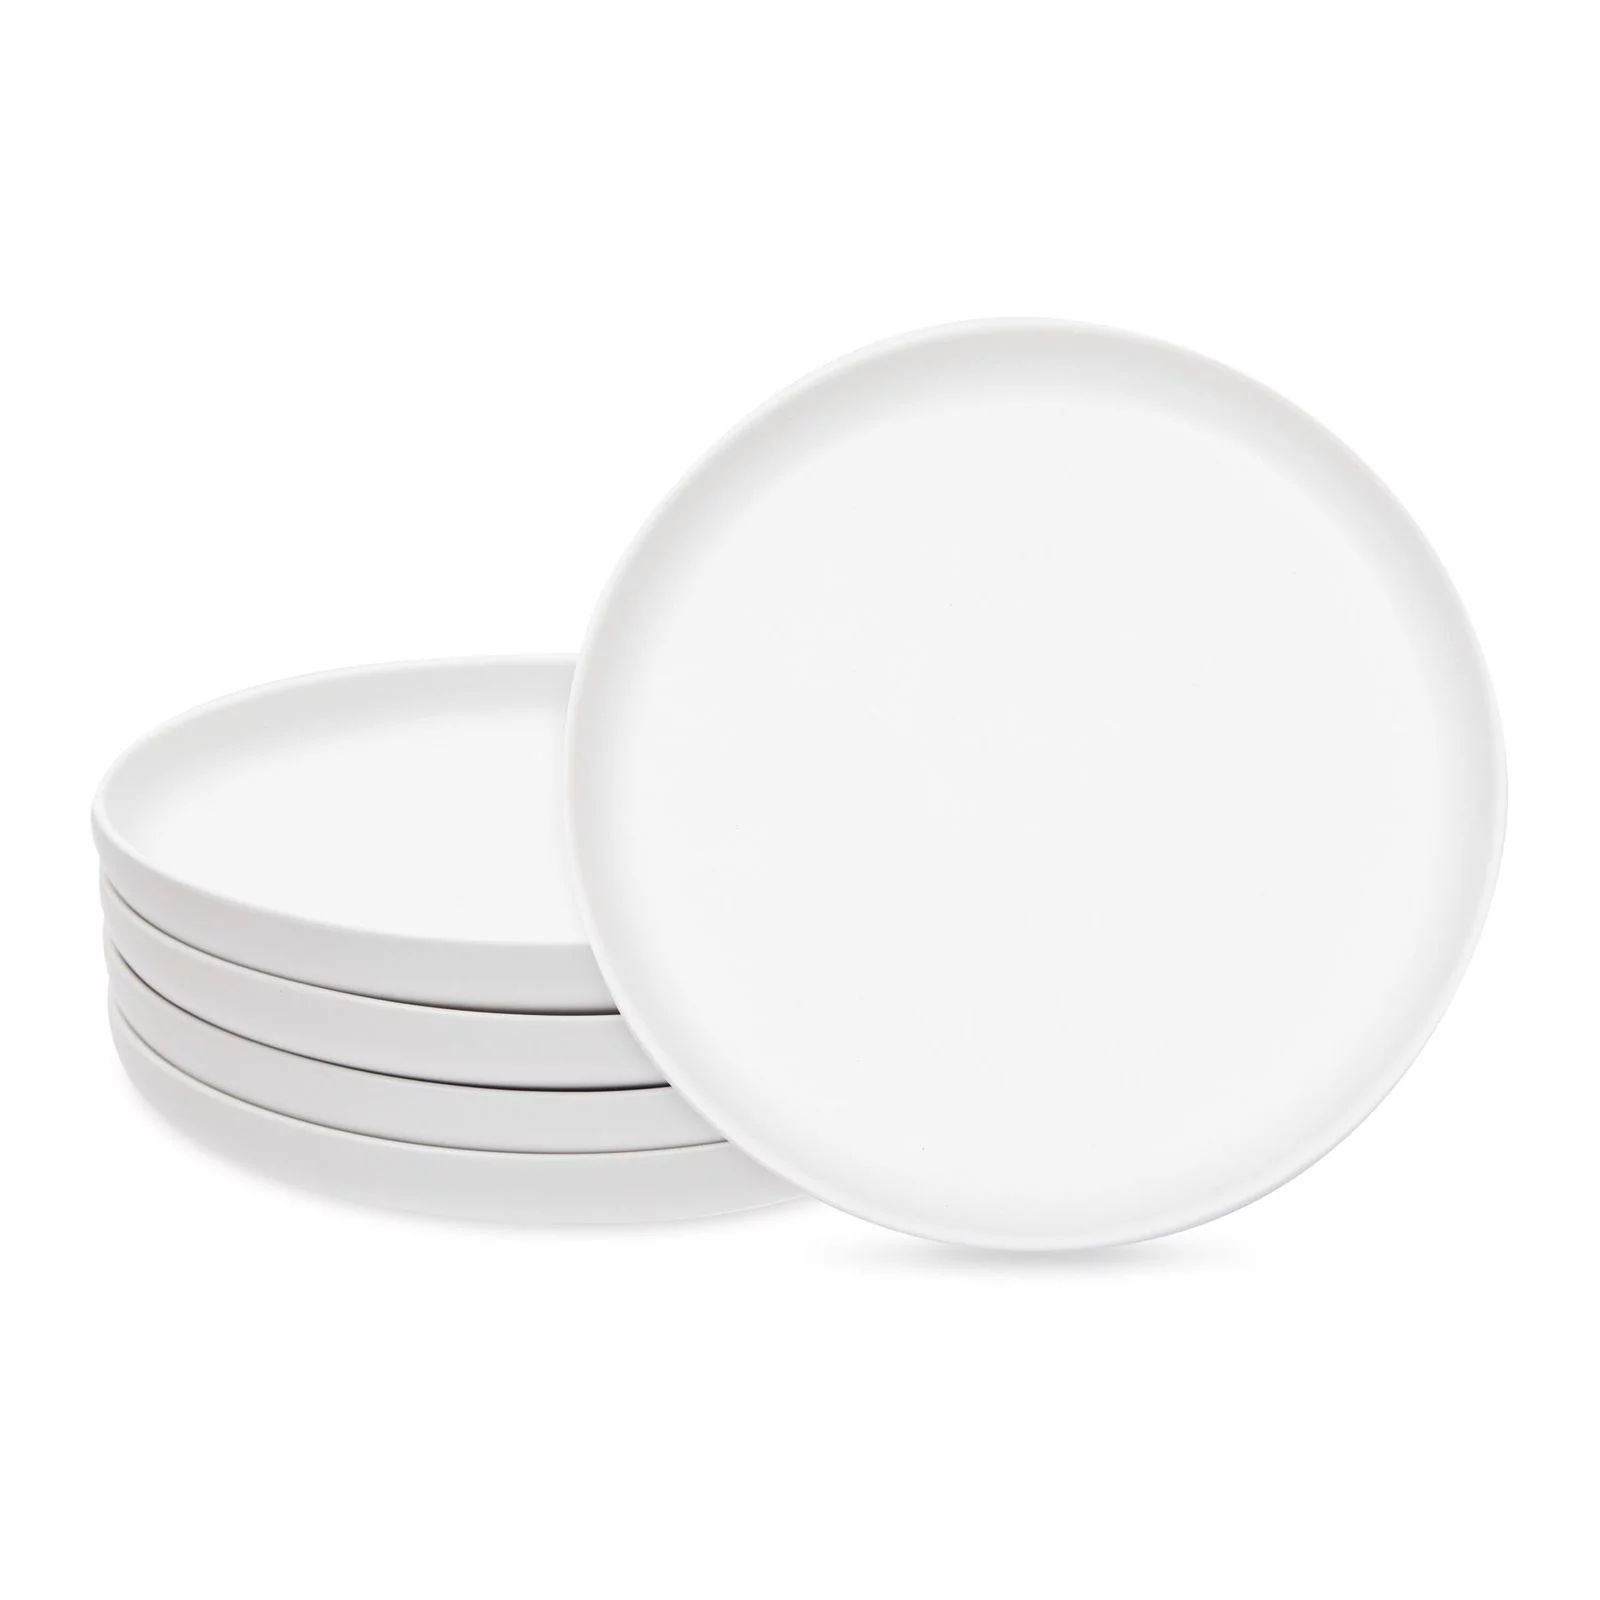 Set of 4 White Ceramic Dinner Plates Dish for Kitchen, Dining Table Decor and Accessories, 8 in. ... | Walmart (US)